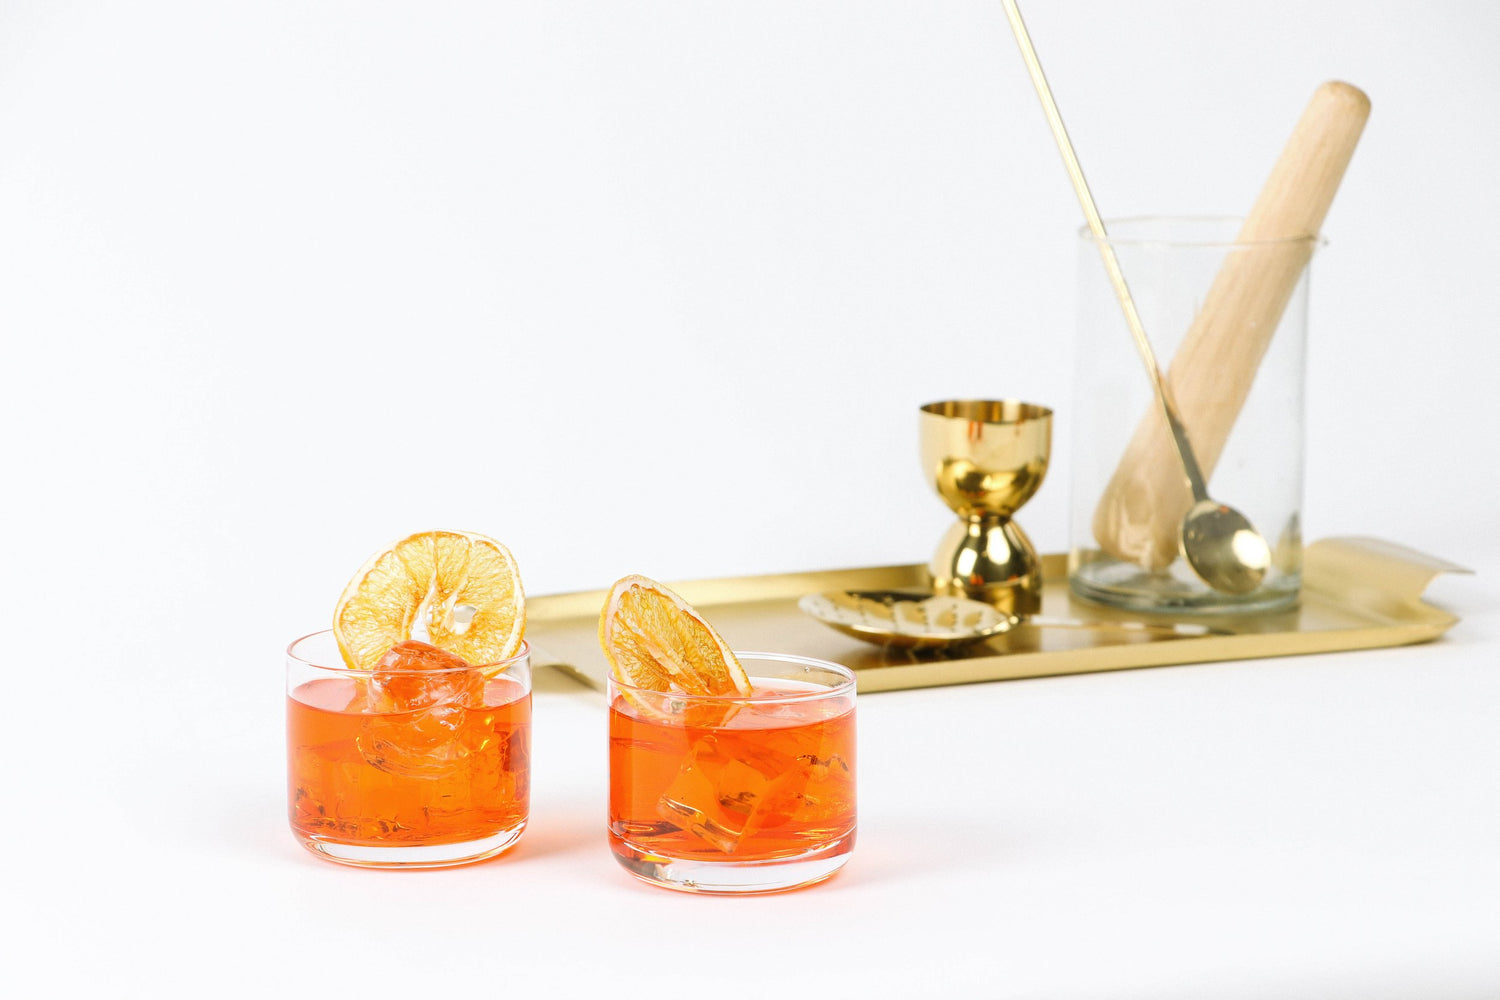 Two cups filled with an orange beverage and topped with orange sliceswith a tray in the background. Tray has cocktail-making tools.